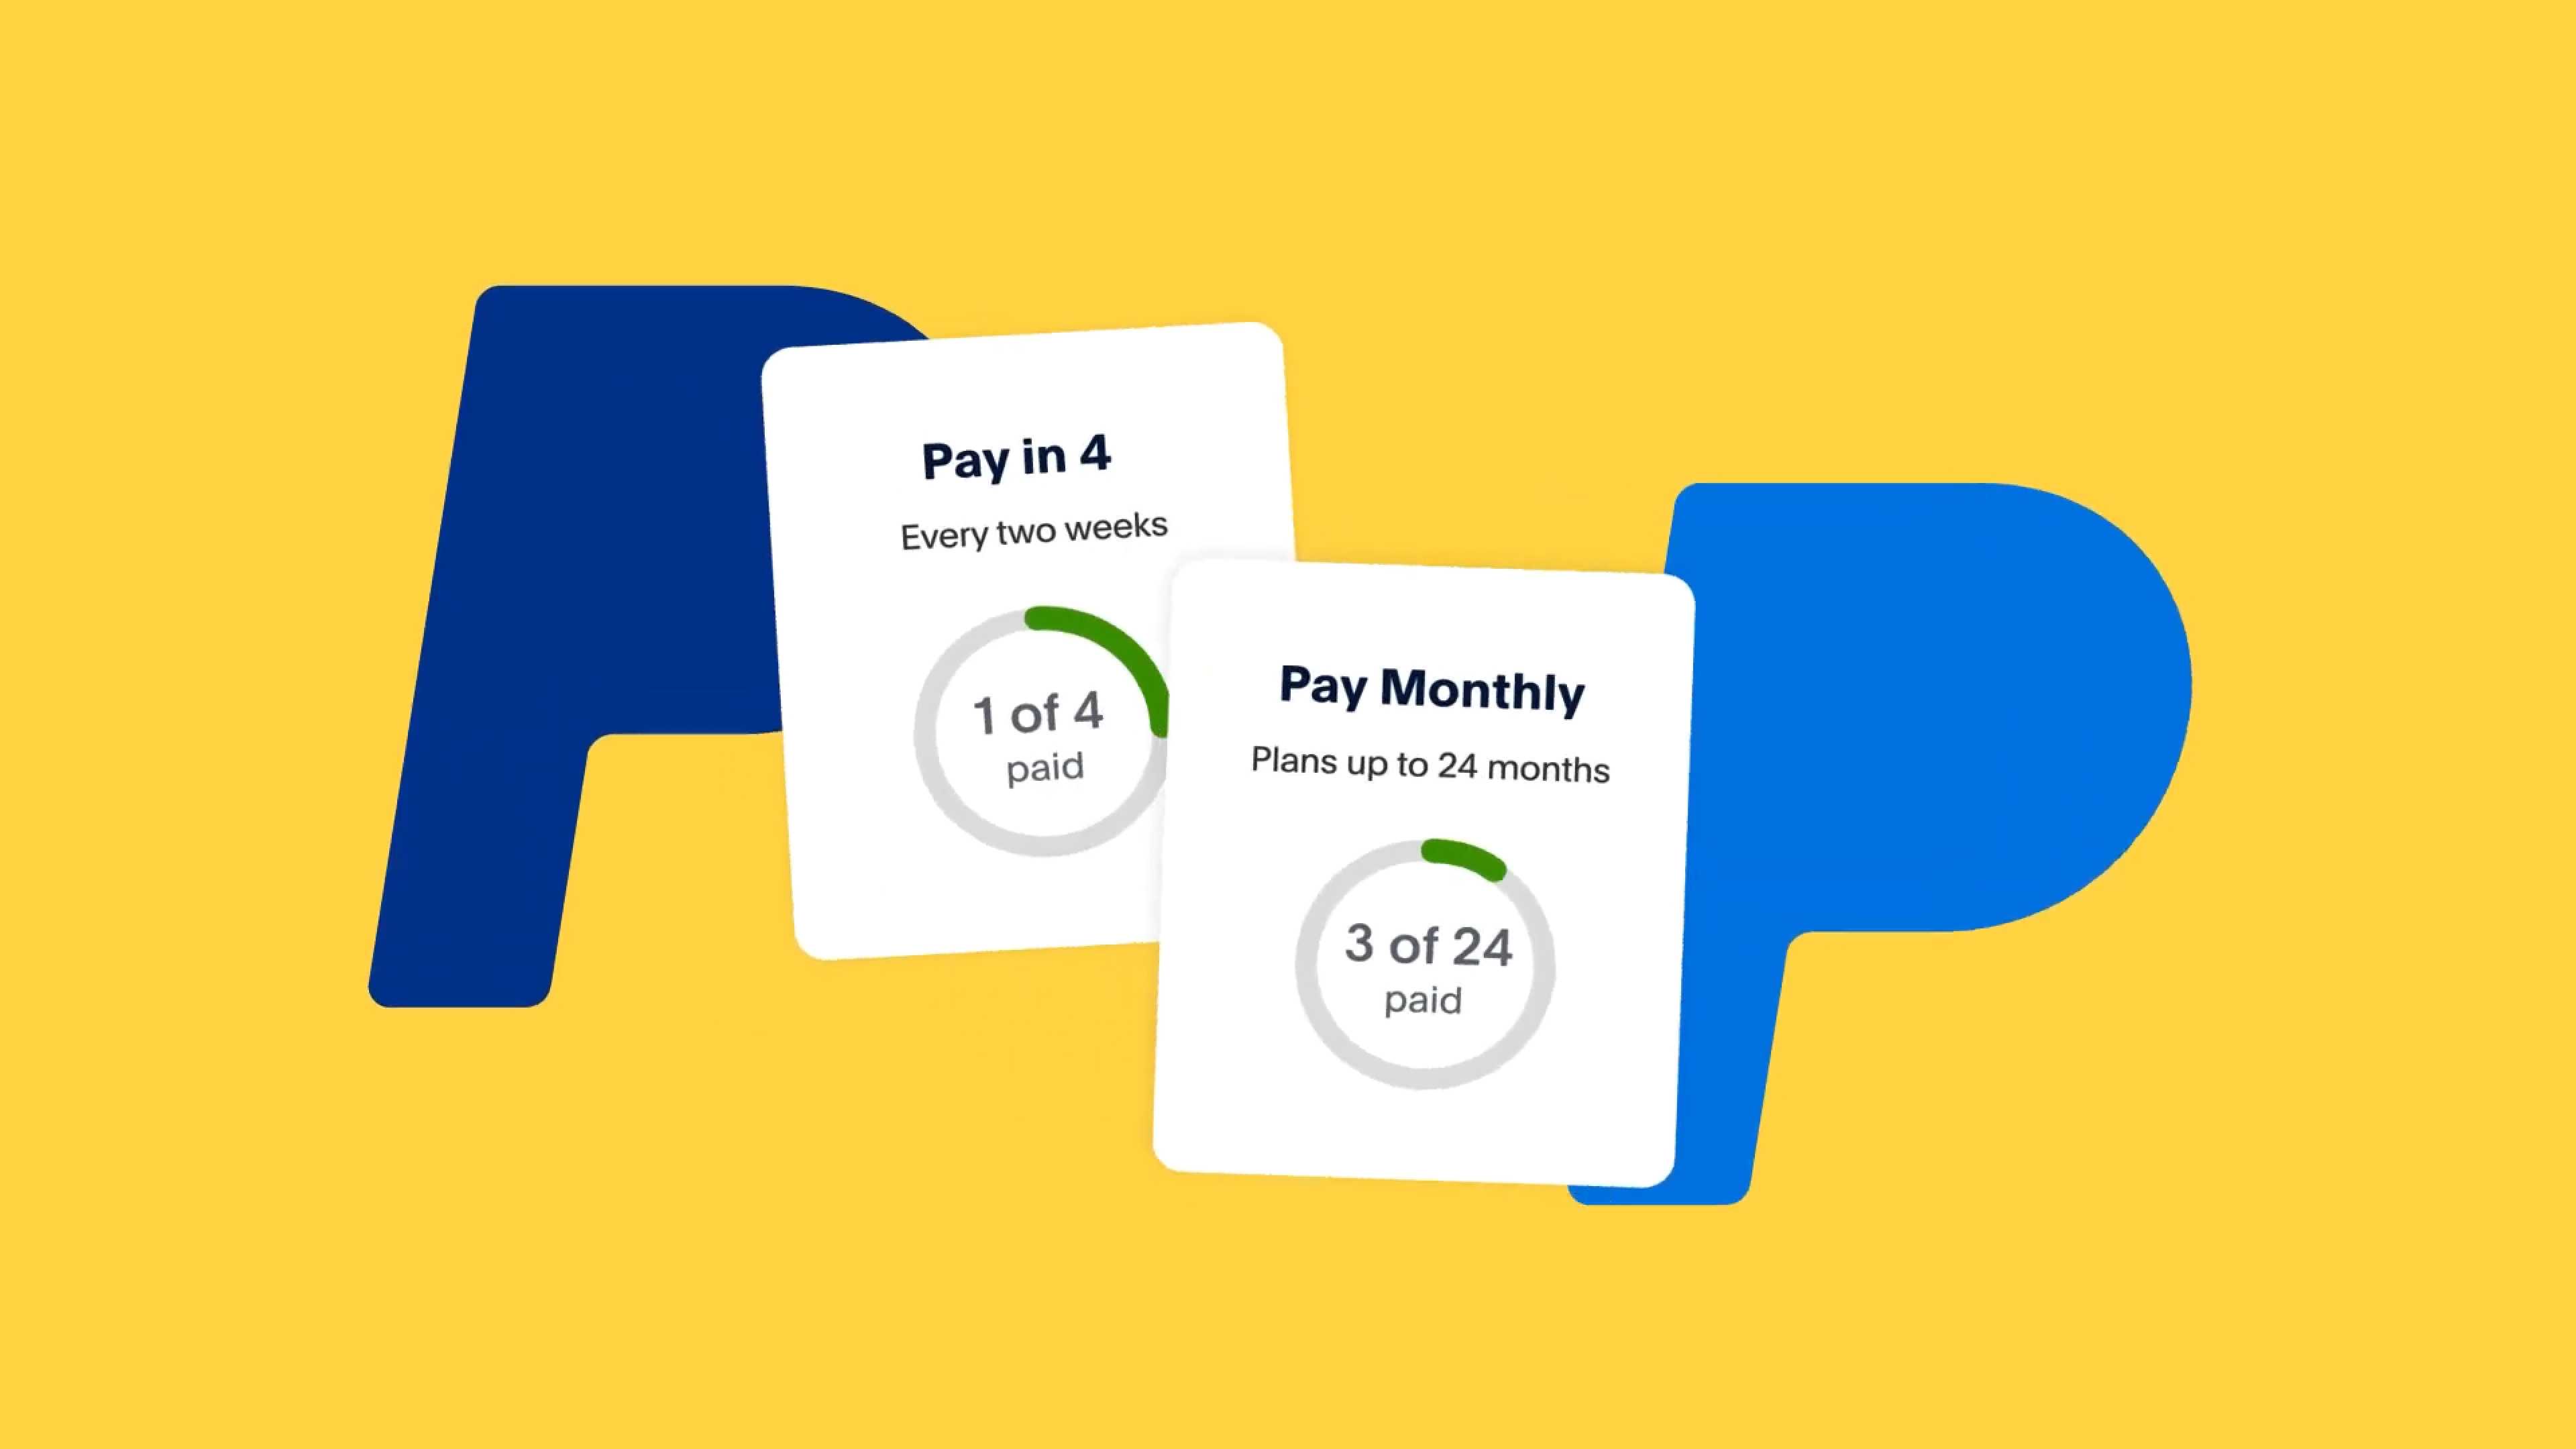 Buy Pay Later | Pay in 4 or Pay Monthly Options | PayPal US